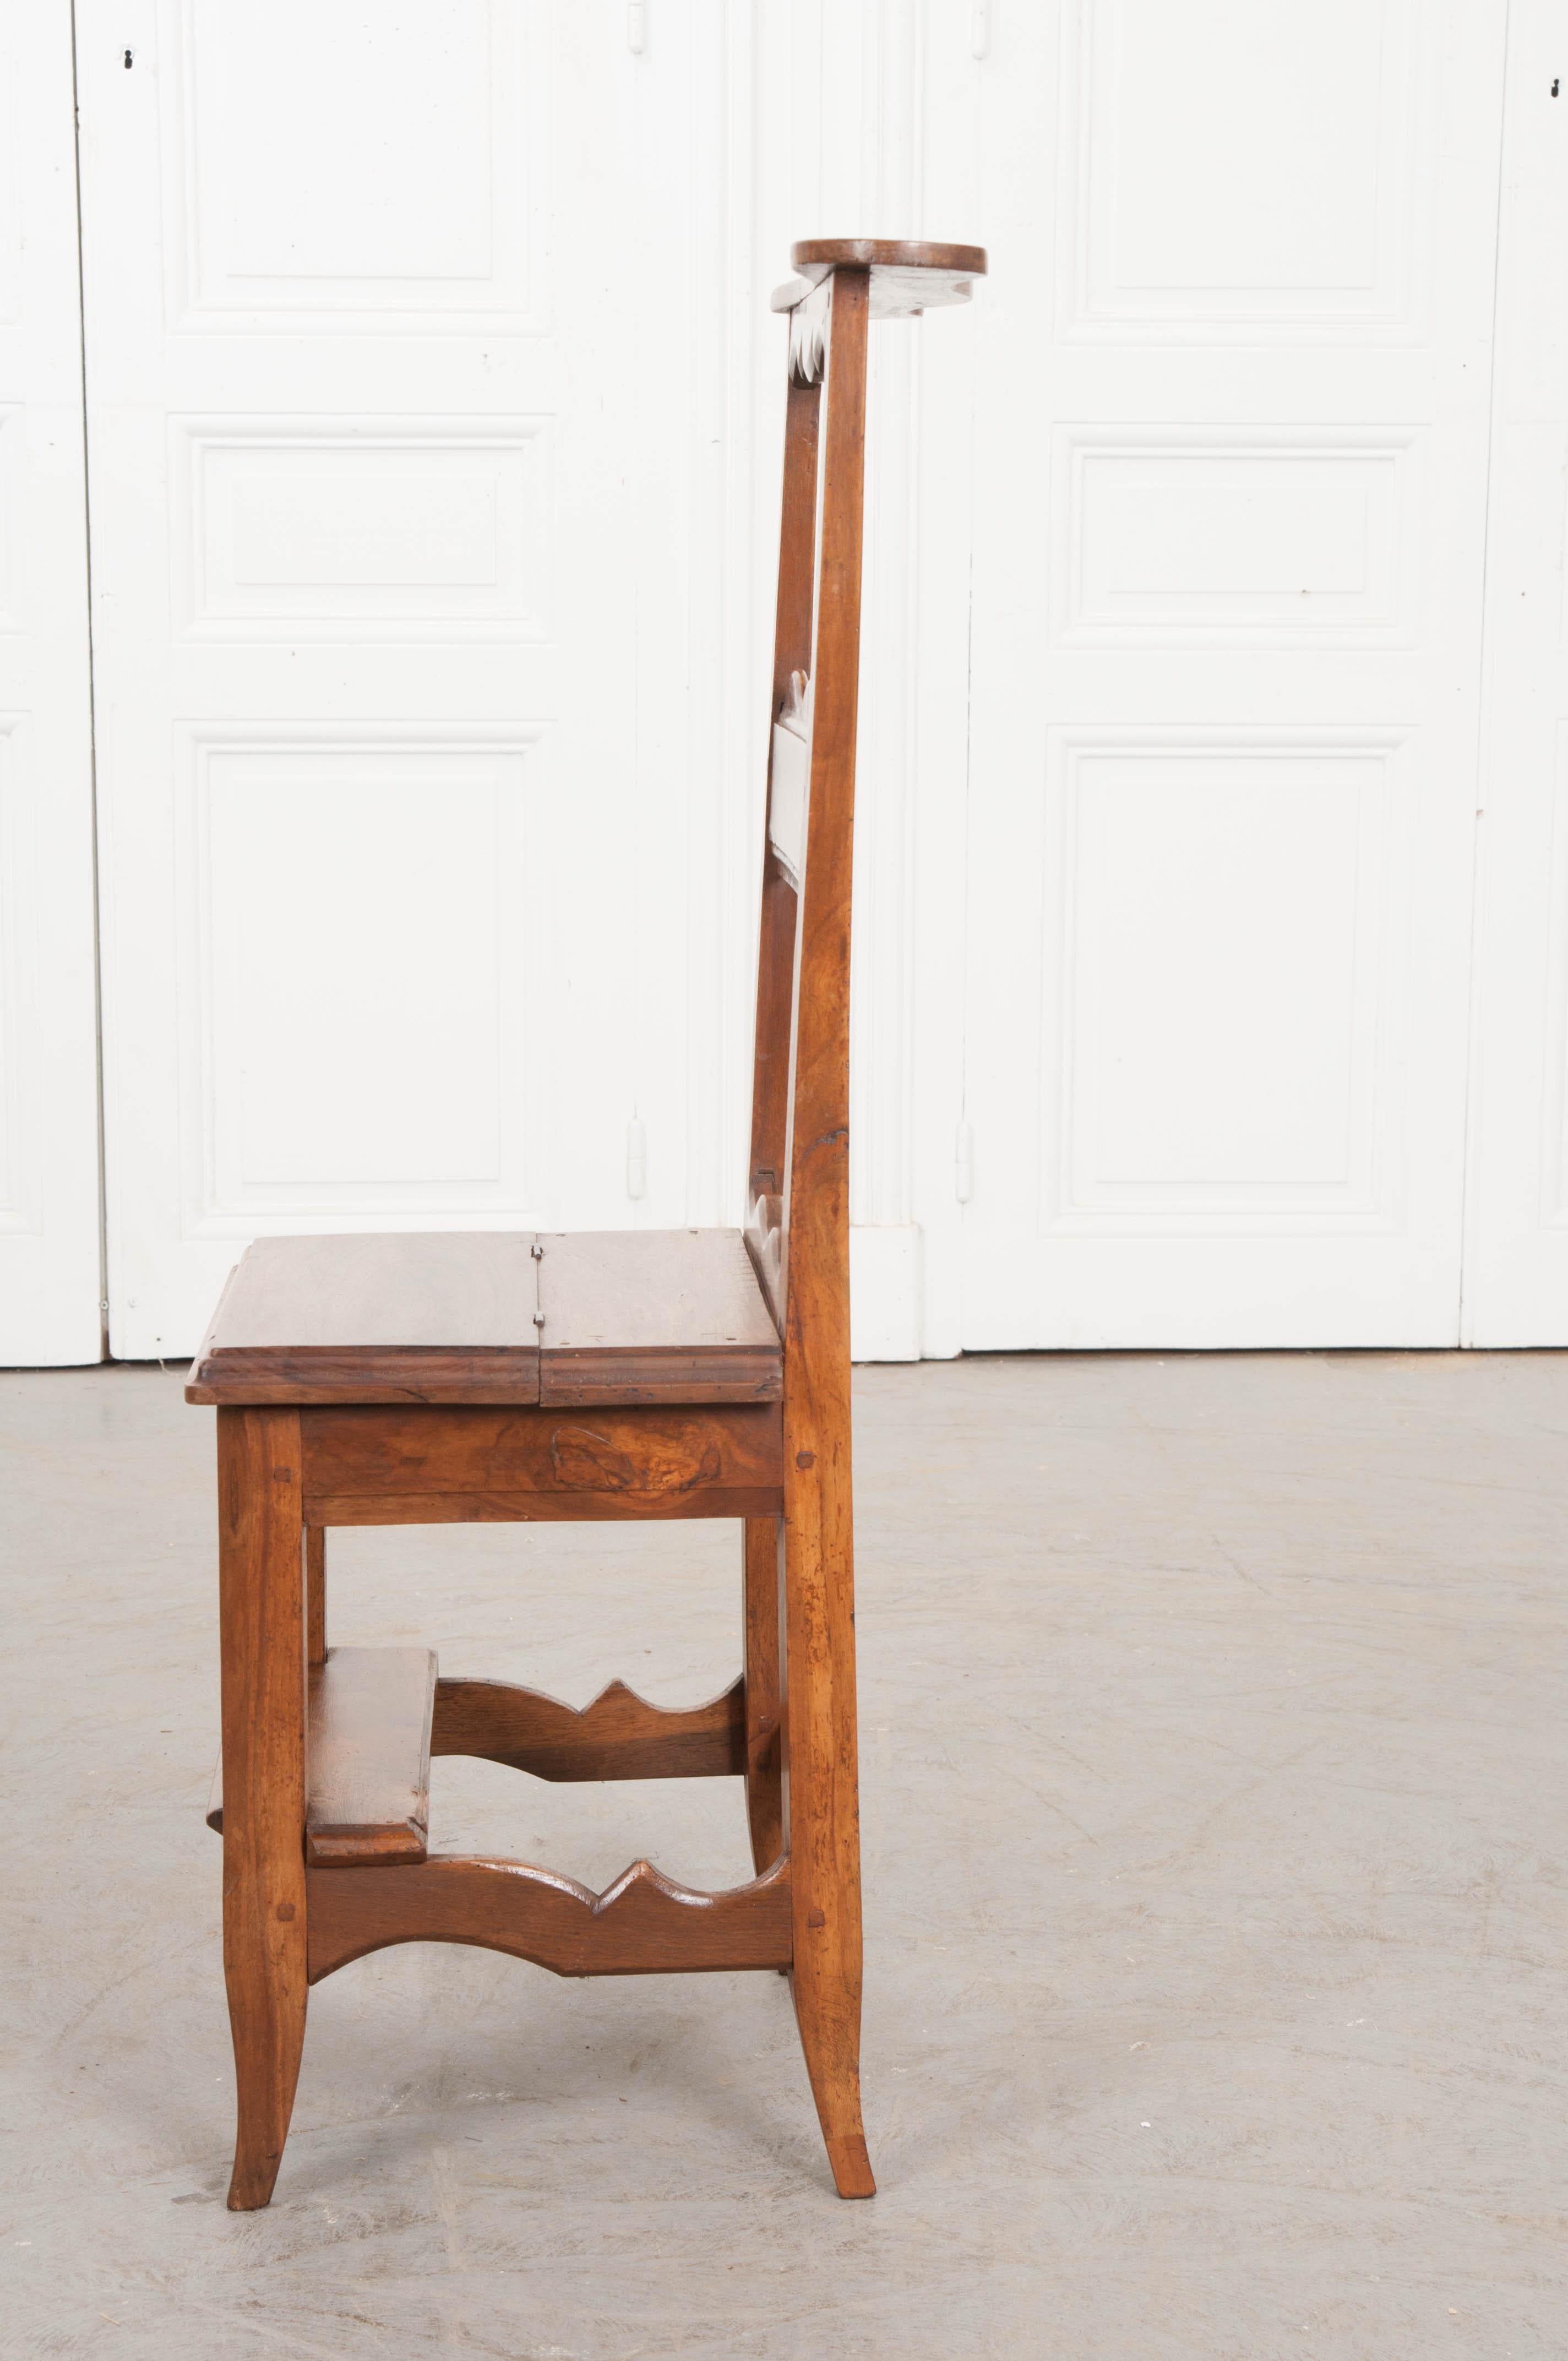 This sweet walnut prie-dieu, circa 1880s, is from the Provincial countryside of France and can be used for a lifetime. Just lift the hinged seat to allow your little one to say their goodnight prayers on the kneeler and when they've grown they can